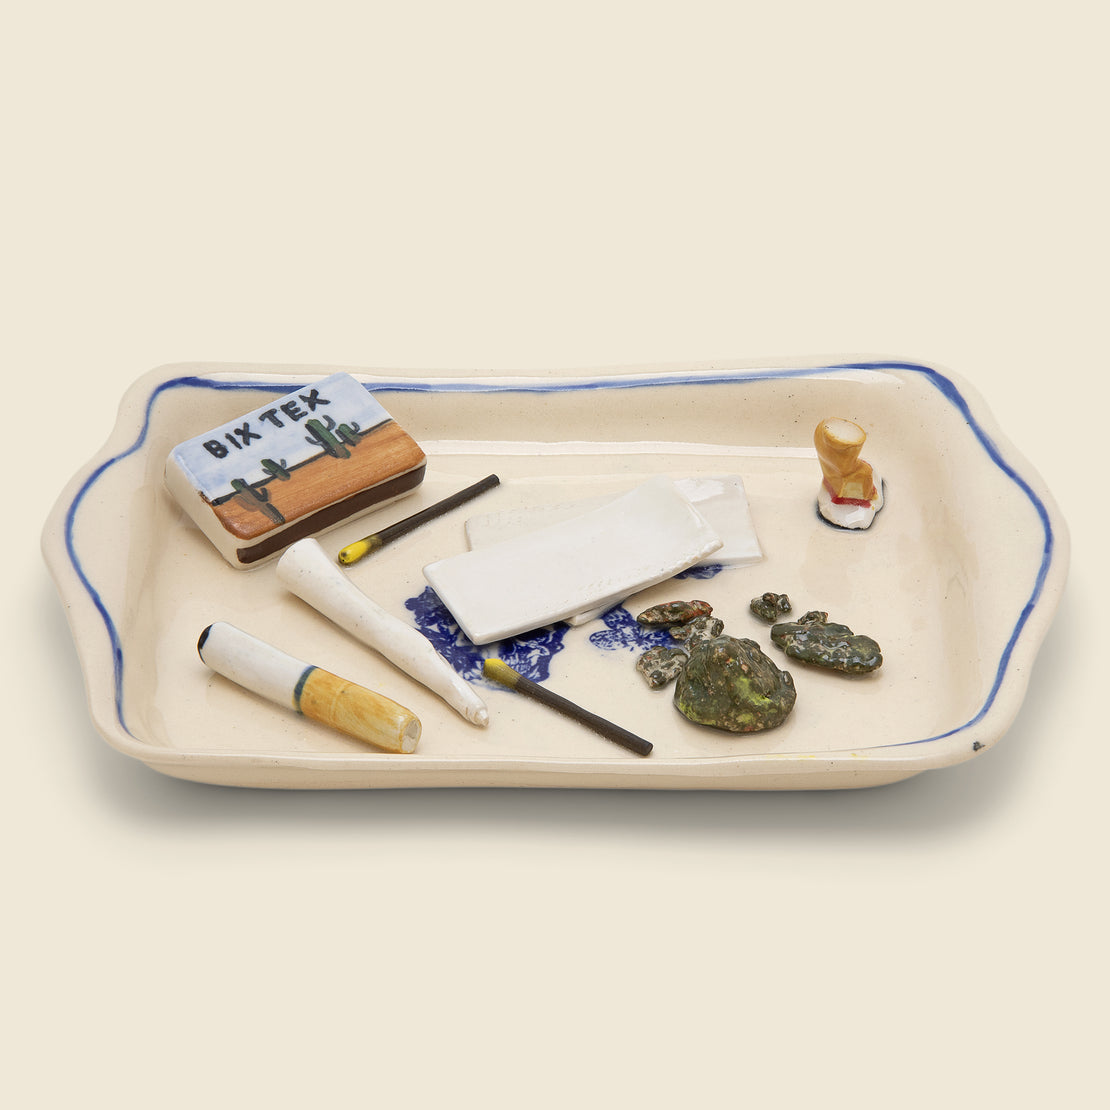 Vice Tray #7 - Home - STAG Provisions - Home - Art & Accessories - Tray